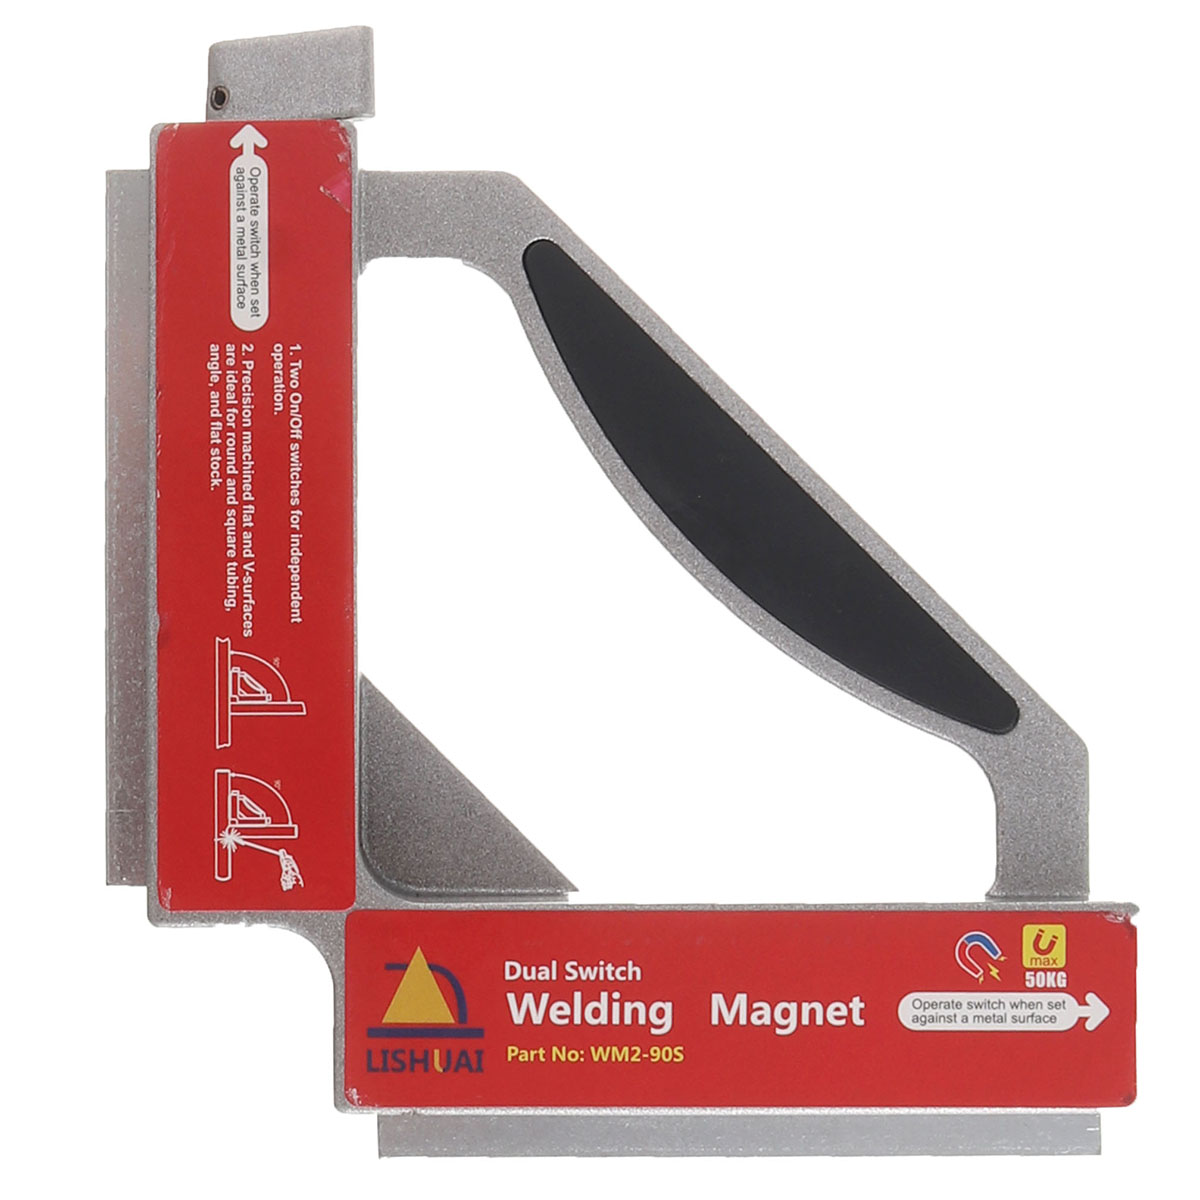 WM2-90S-Double-Switch-Neodymium-Welding-Magnets-Strong-NdFeB-Magnetic-Clamp-Holder-50Kg-Pulling-Forc-1813655-1